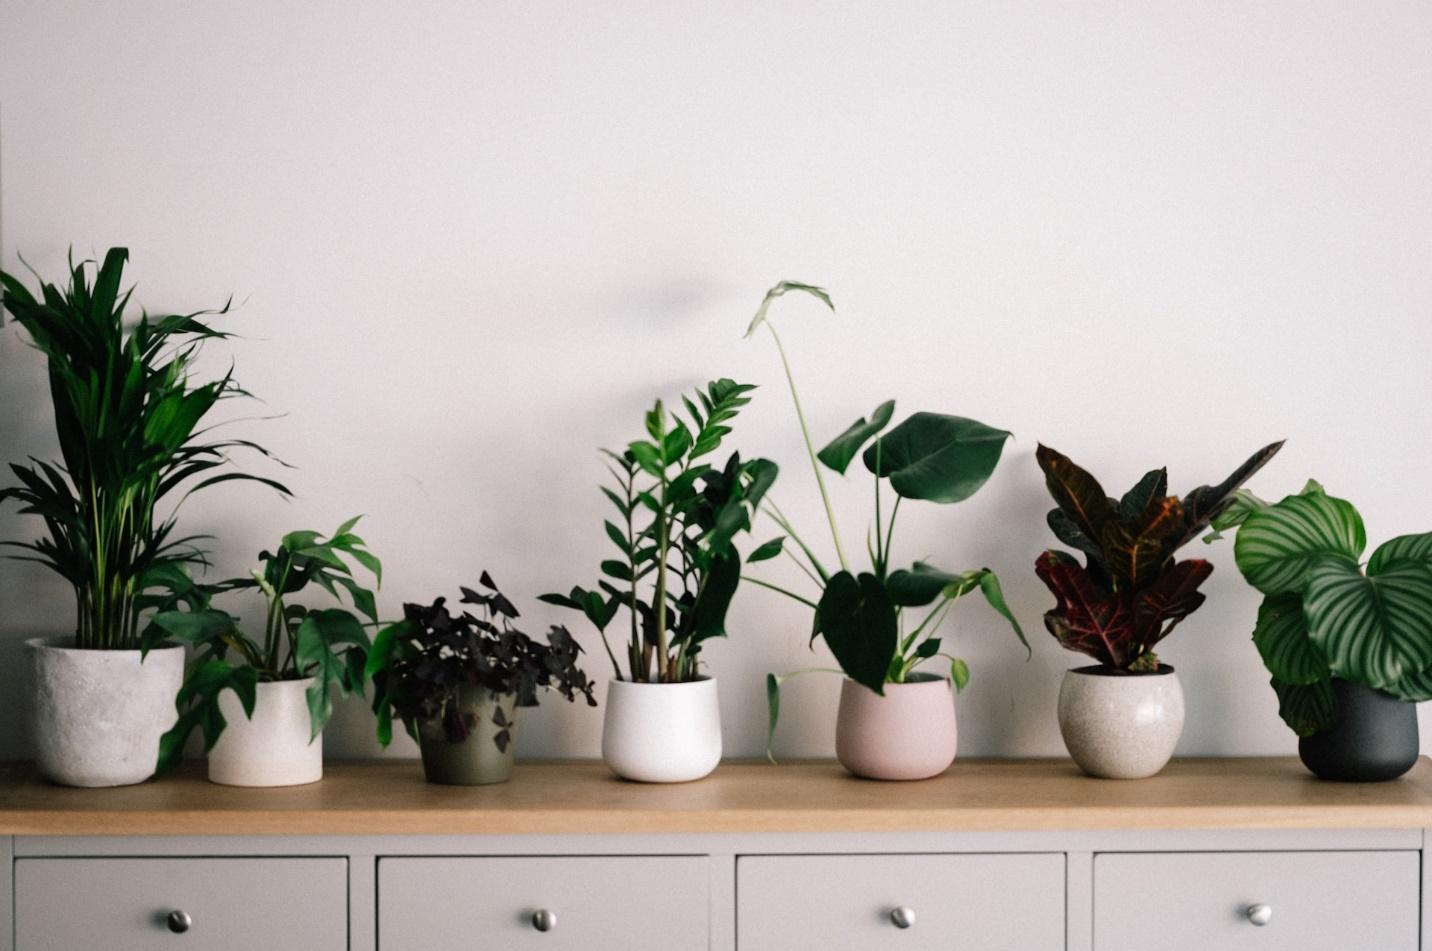 A collection of a remote worker's indoor plants